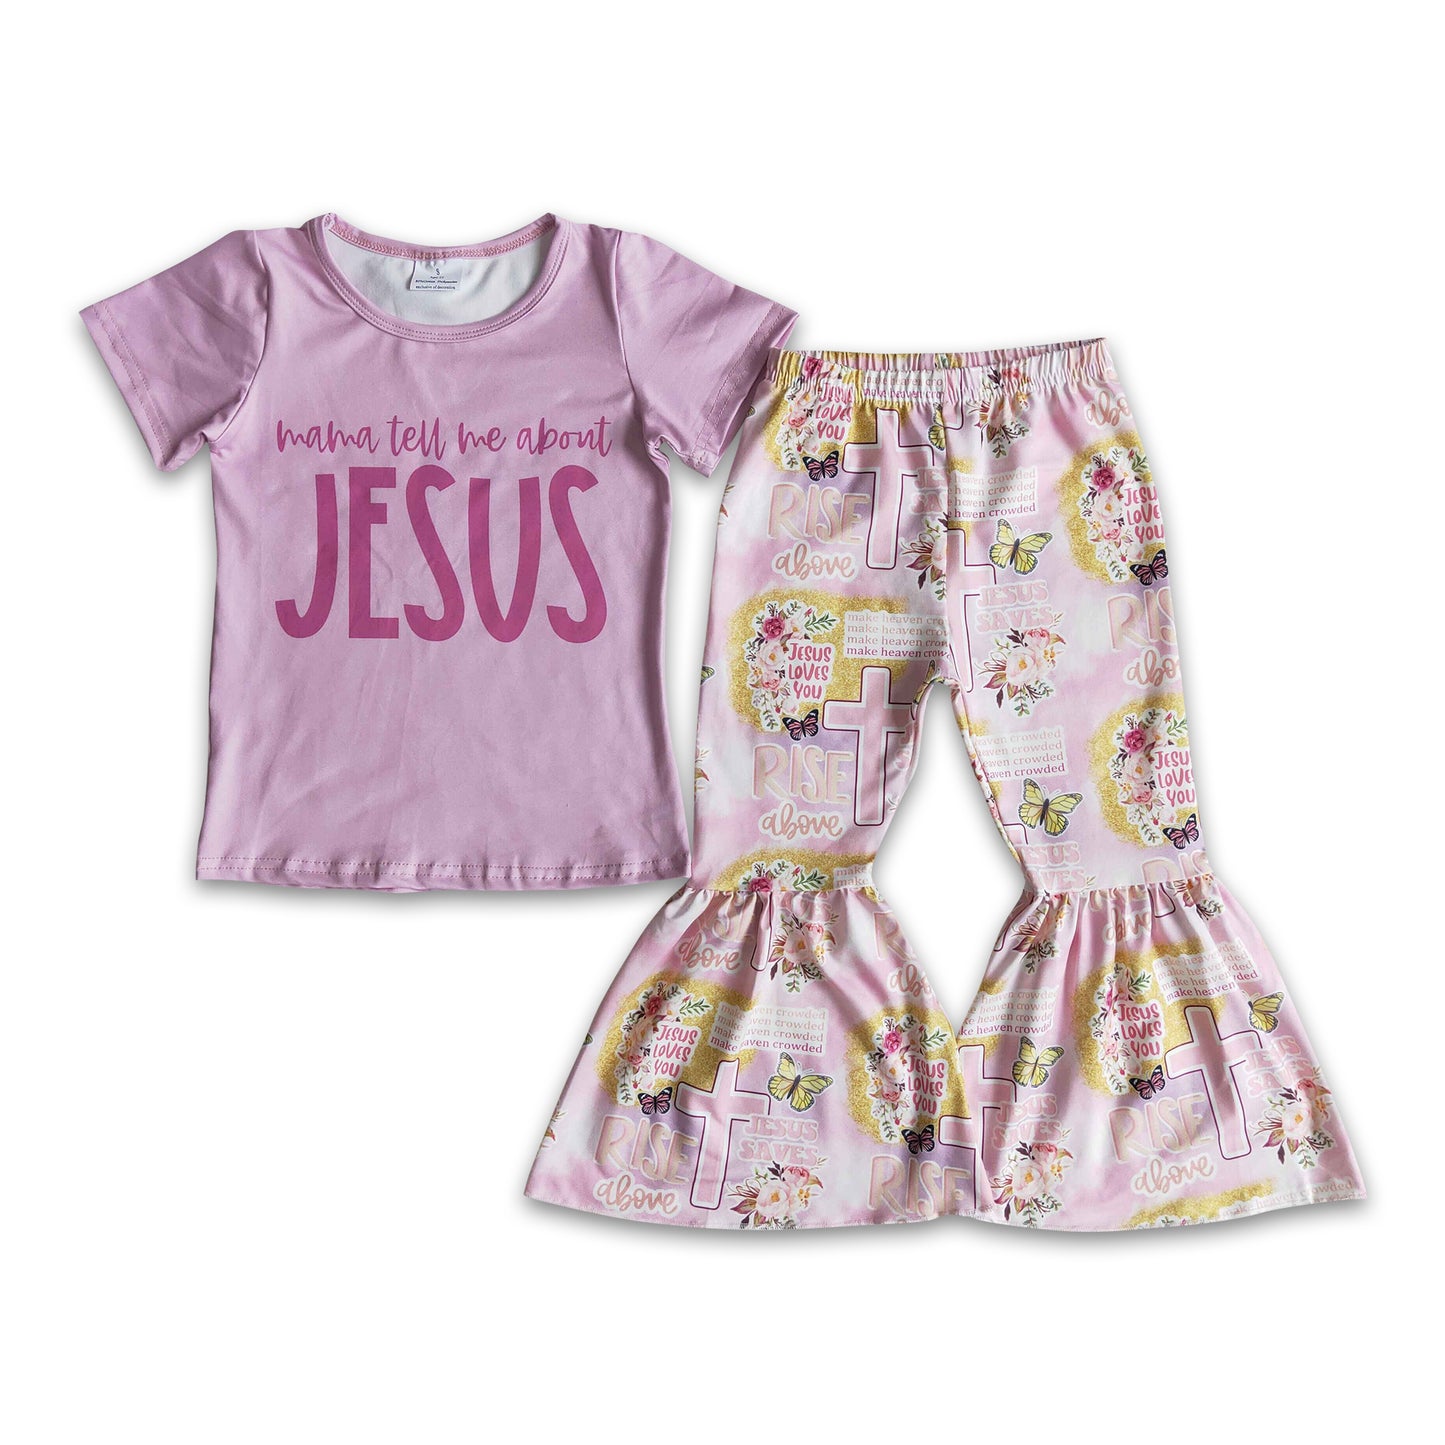 Mama tell me about jesus shirt pants girls easter clothing